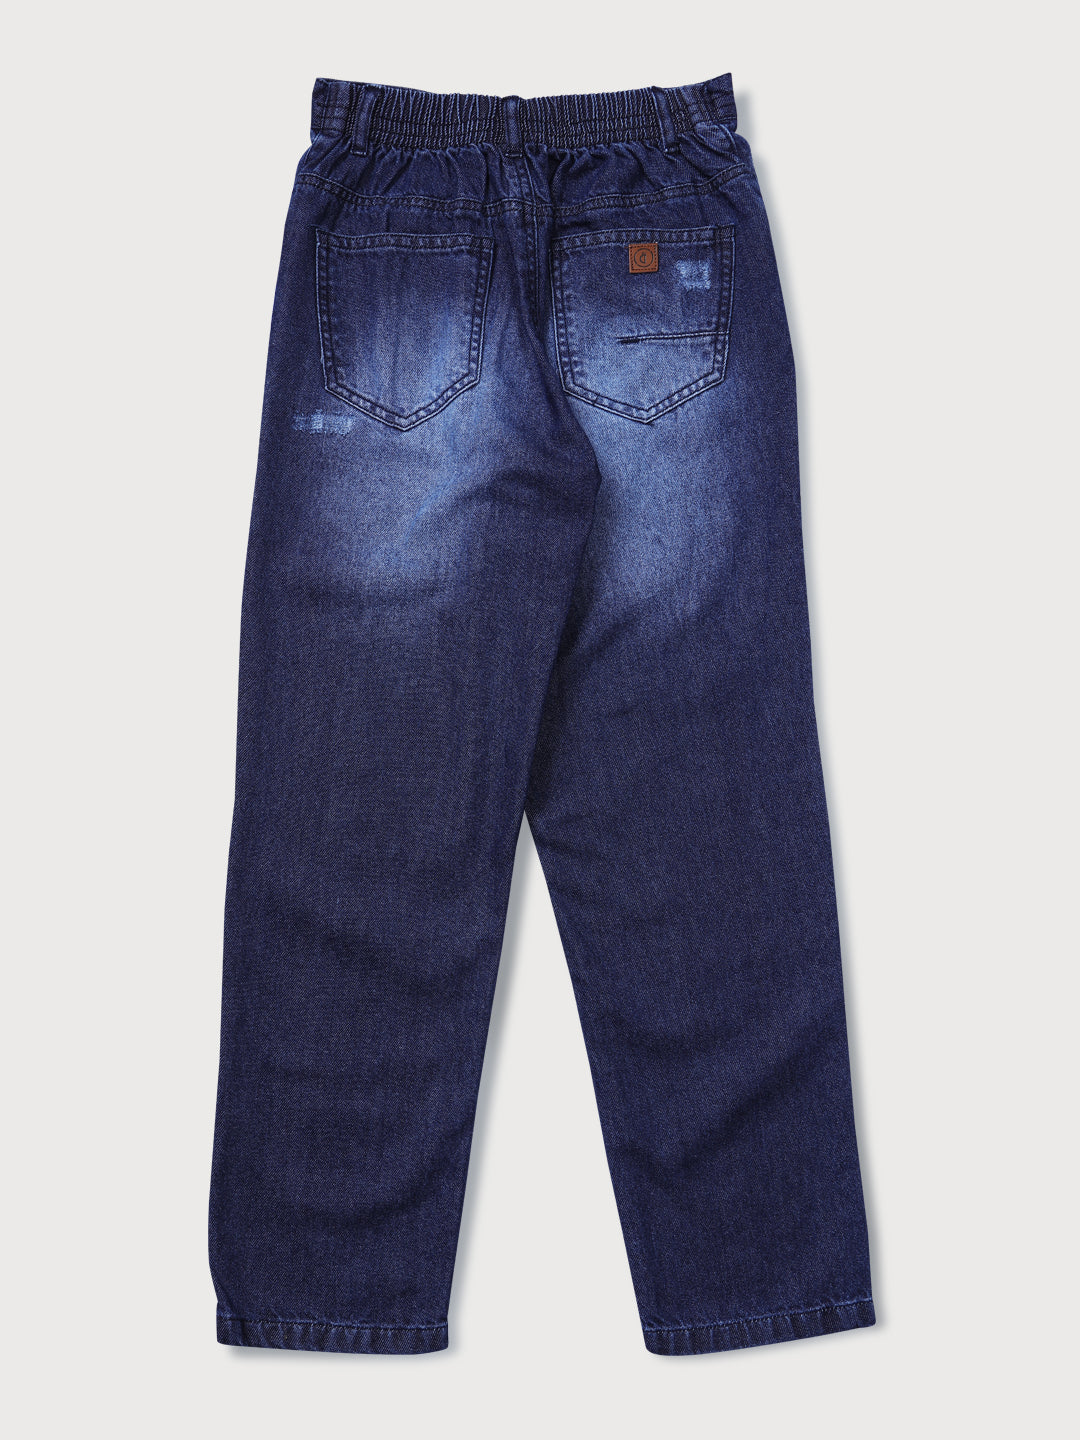 Boys Blue Cotton Washed Fixed Waist Jeans